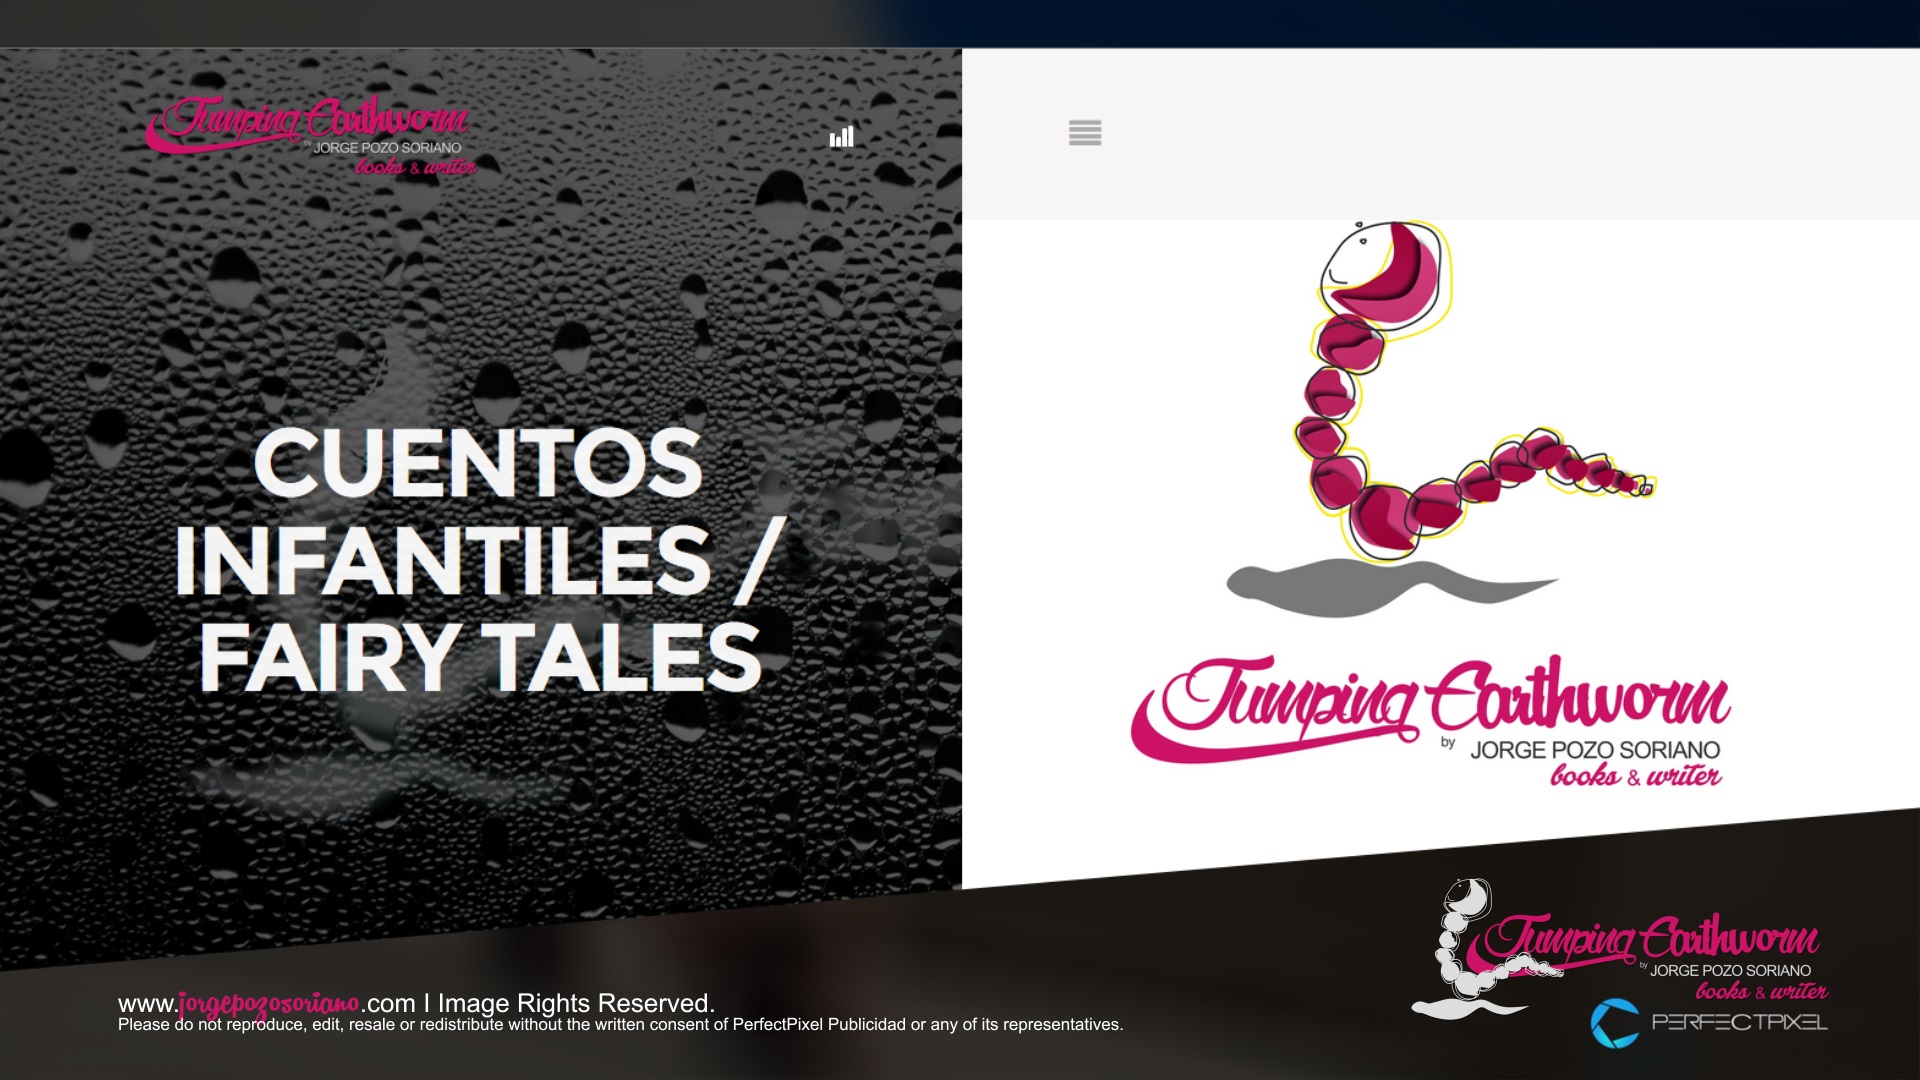 Jumper Earthworm by Jorge Pozo Soriano (Books & Writer) - Website and Corporate Image Design